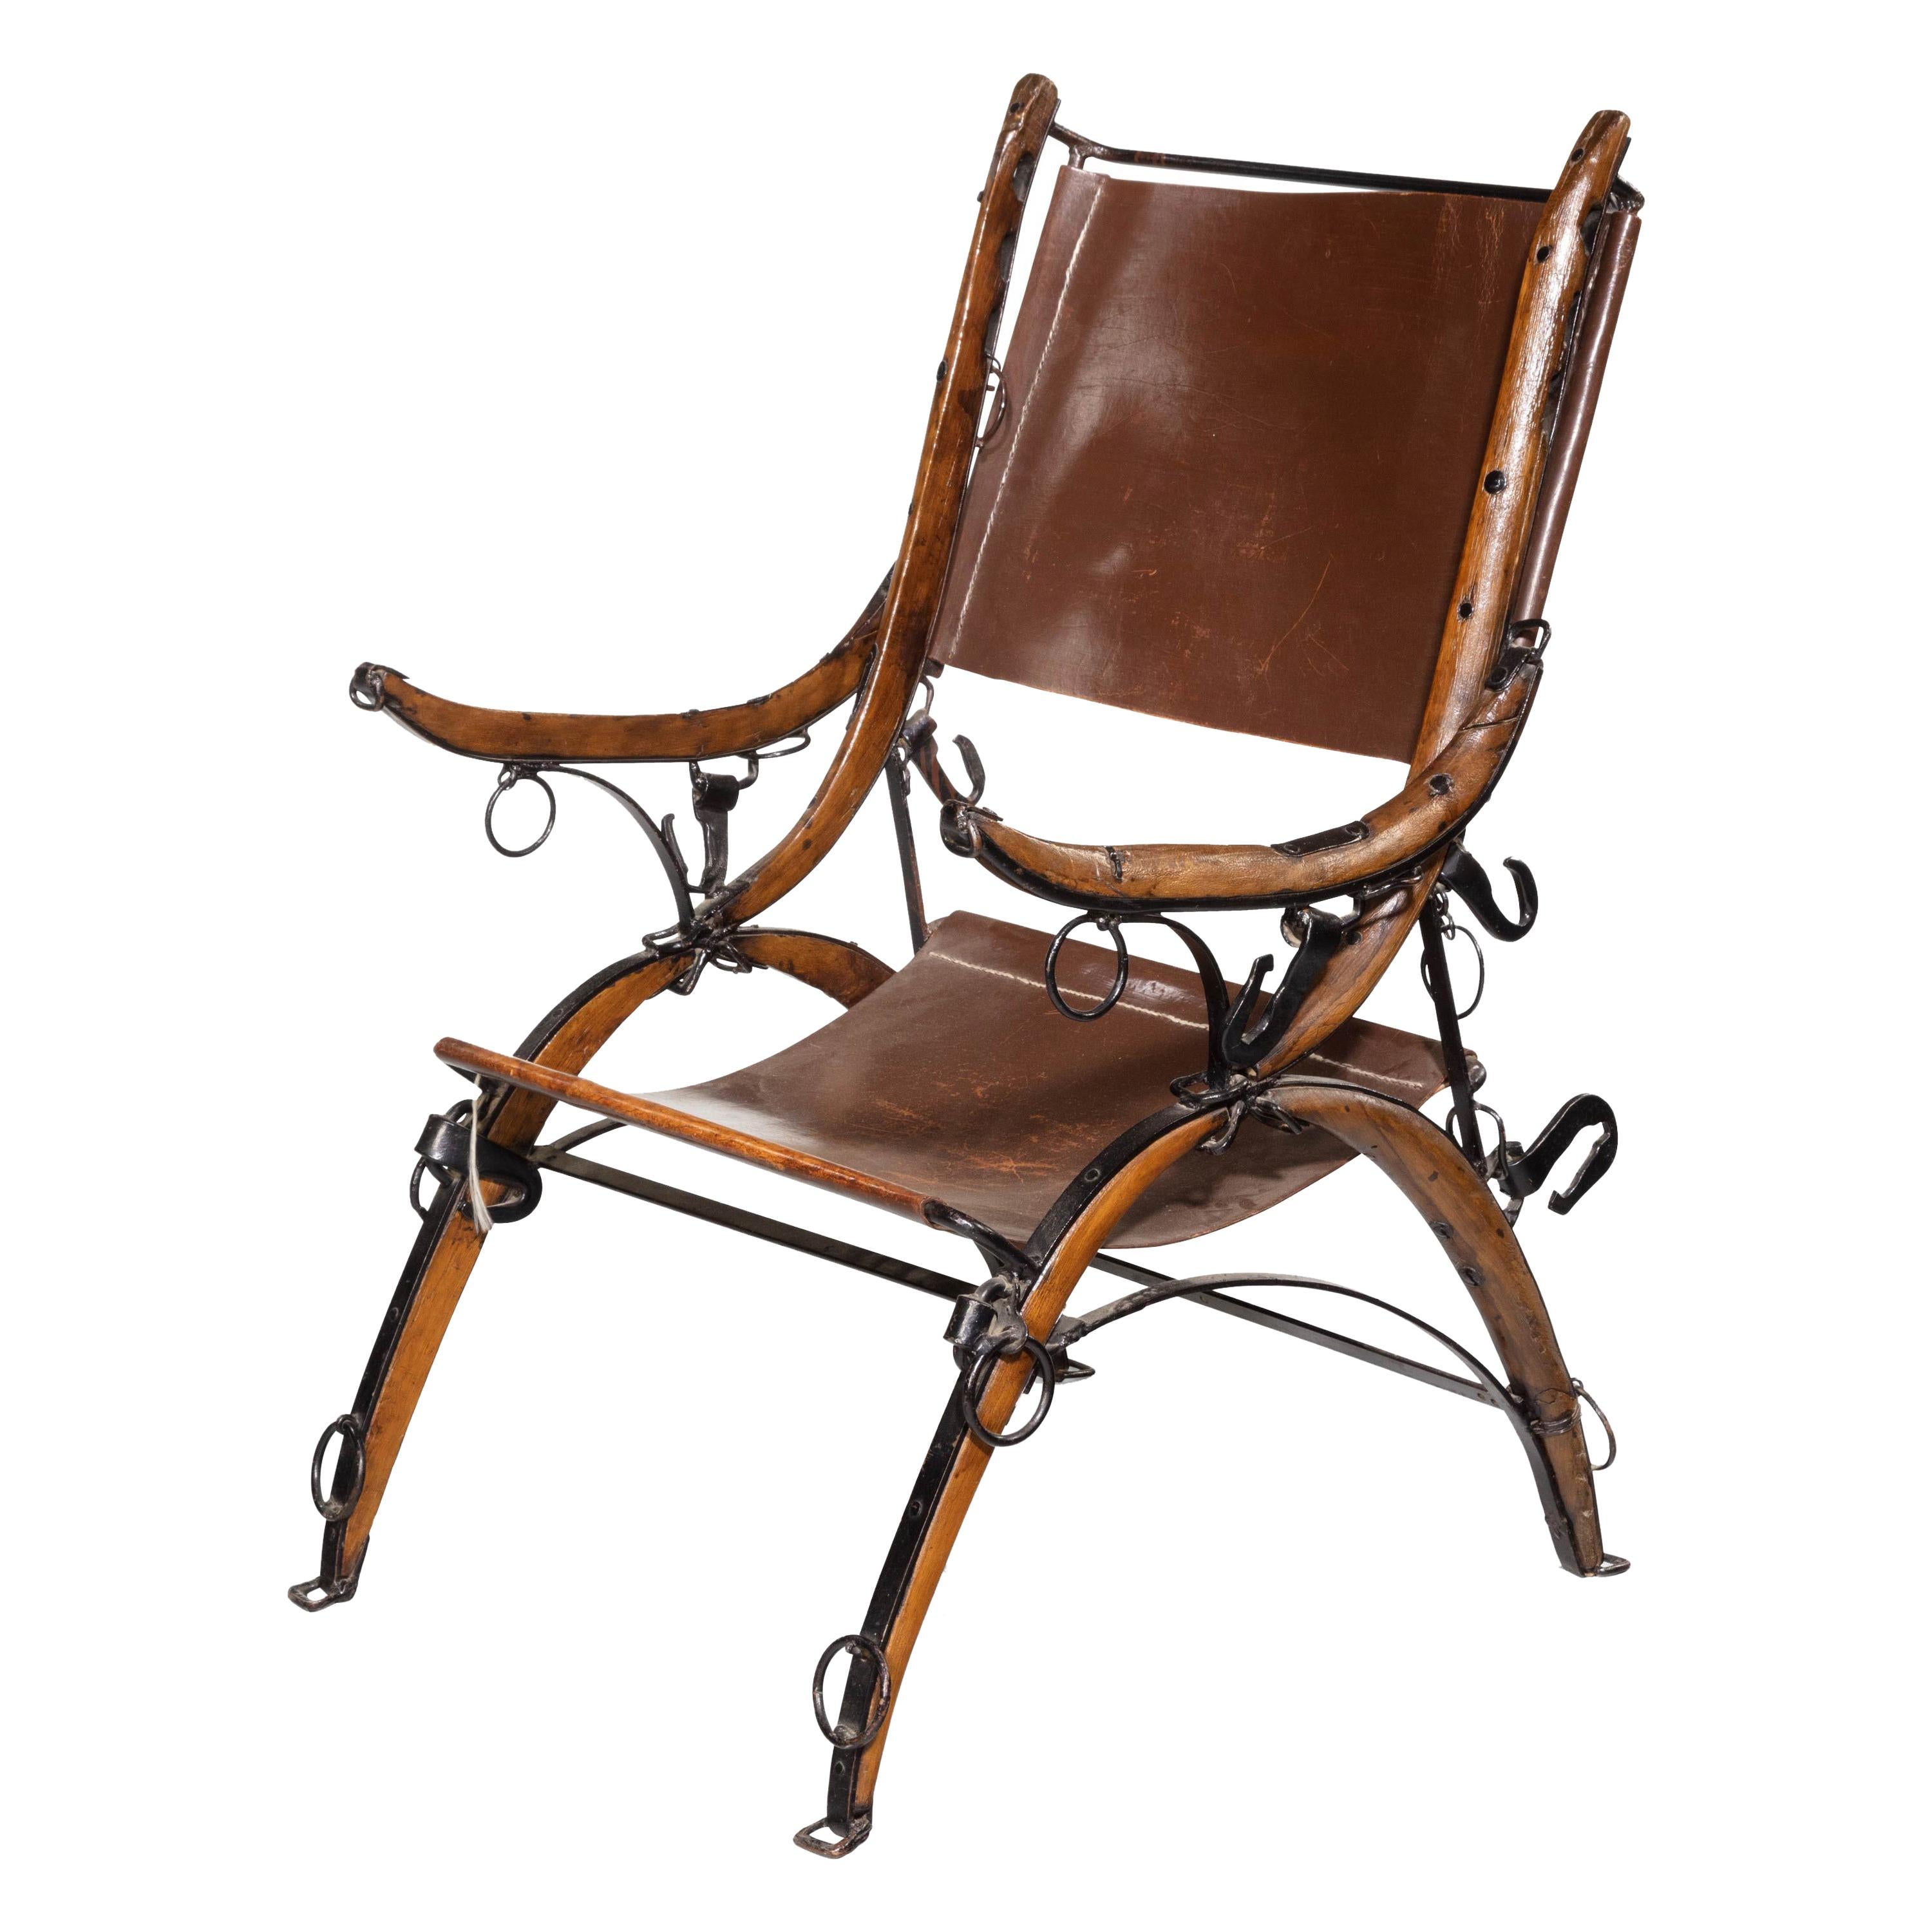 Unusual Early 20th Century Chair Made from Horse Hames